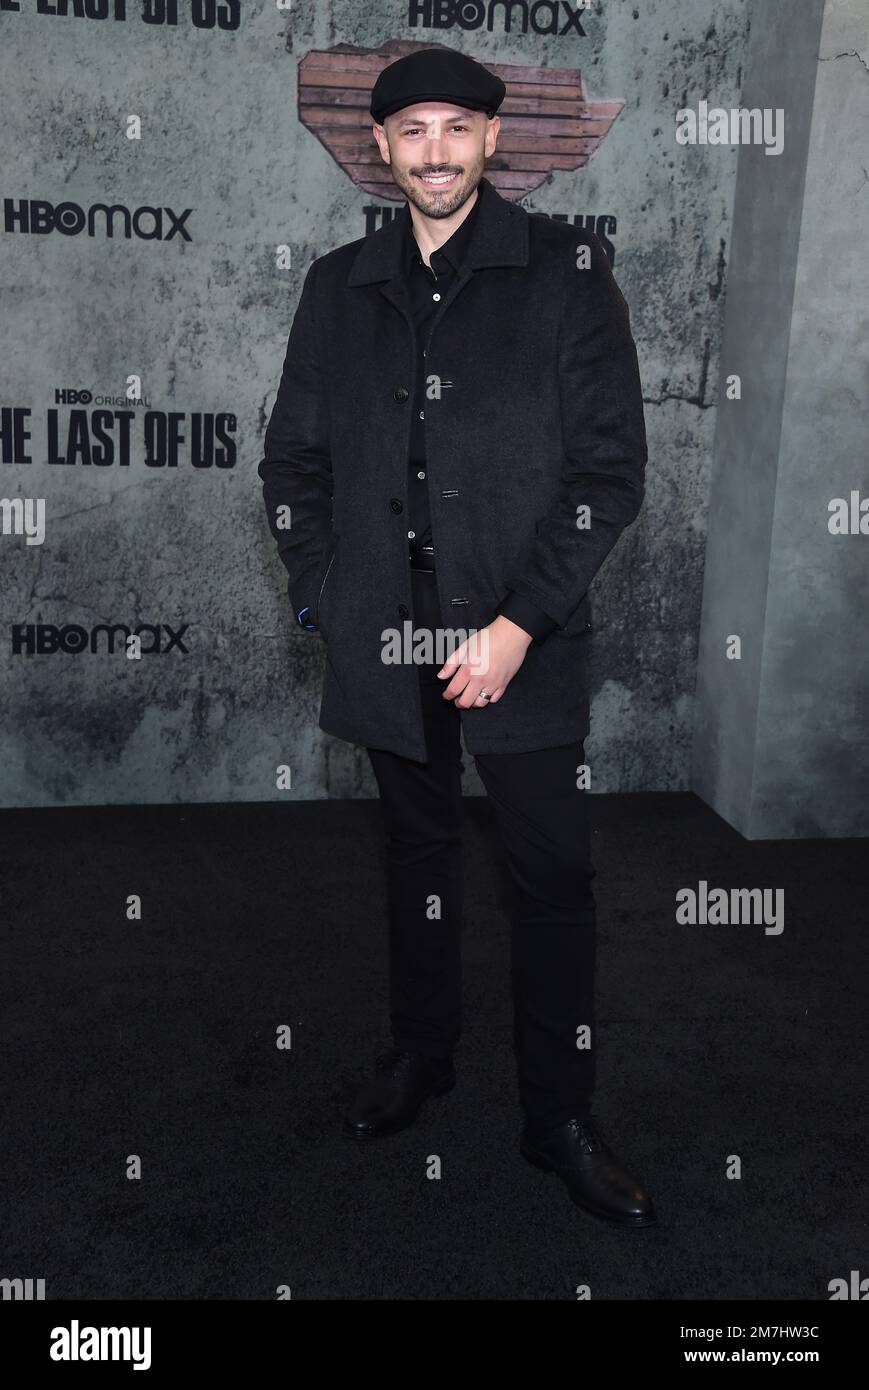 Troy Baker at arrivals for THE LAST OF US Premiere, Regency Village Theatre  in Westwood, Los